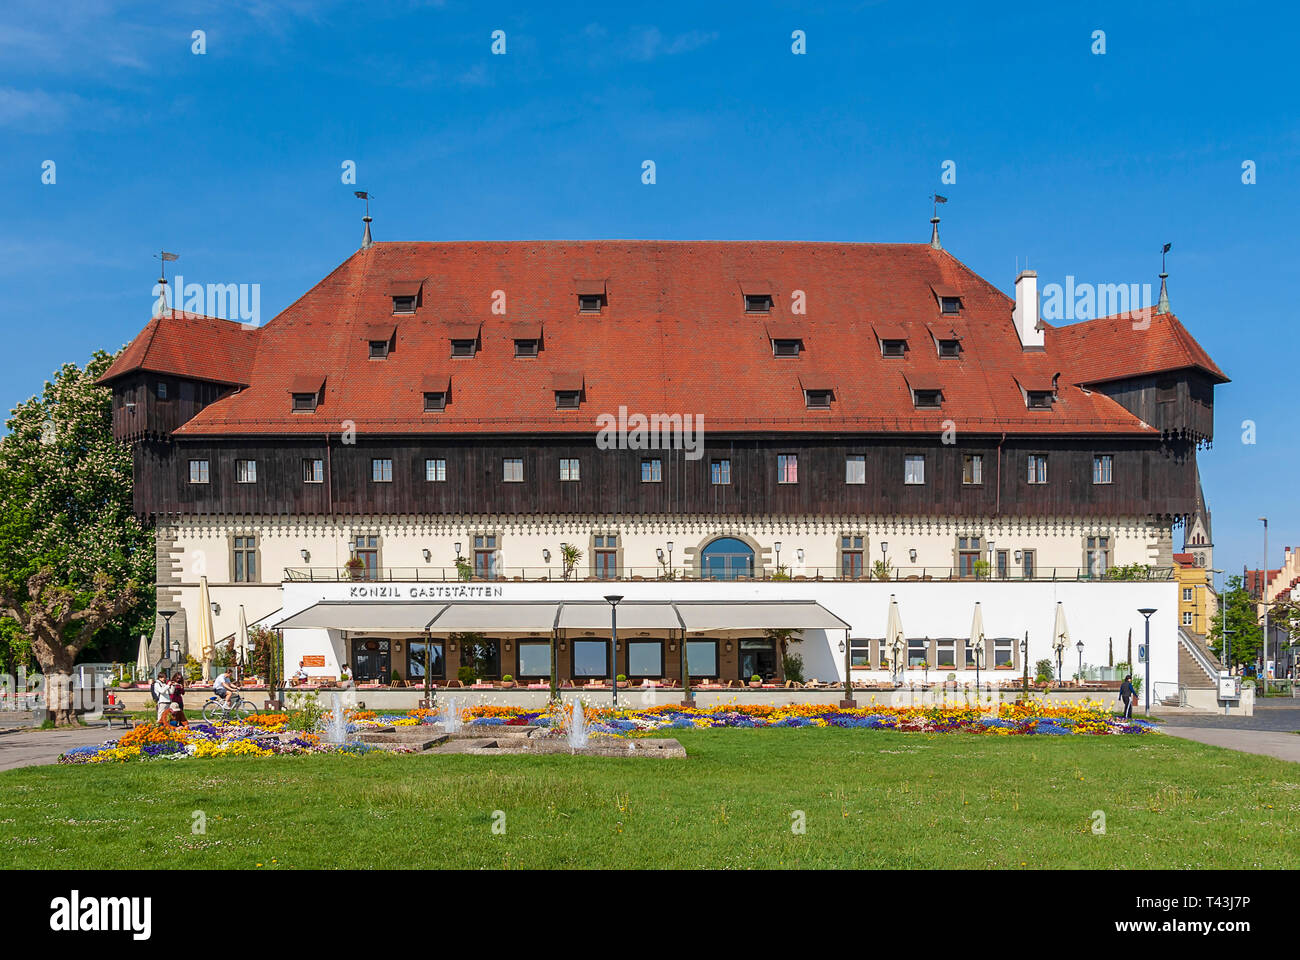 Konstanz at Lake Constance, Germany - May 10, 2009: View of the famous Concile Building where the Concile of Constance took place from 1414 to 1418. Stock Photo